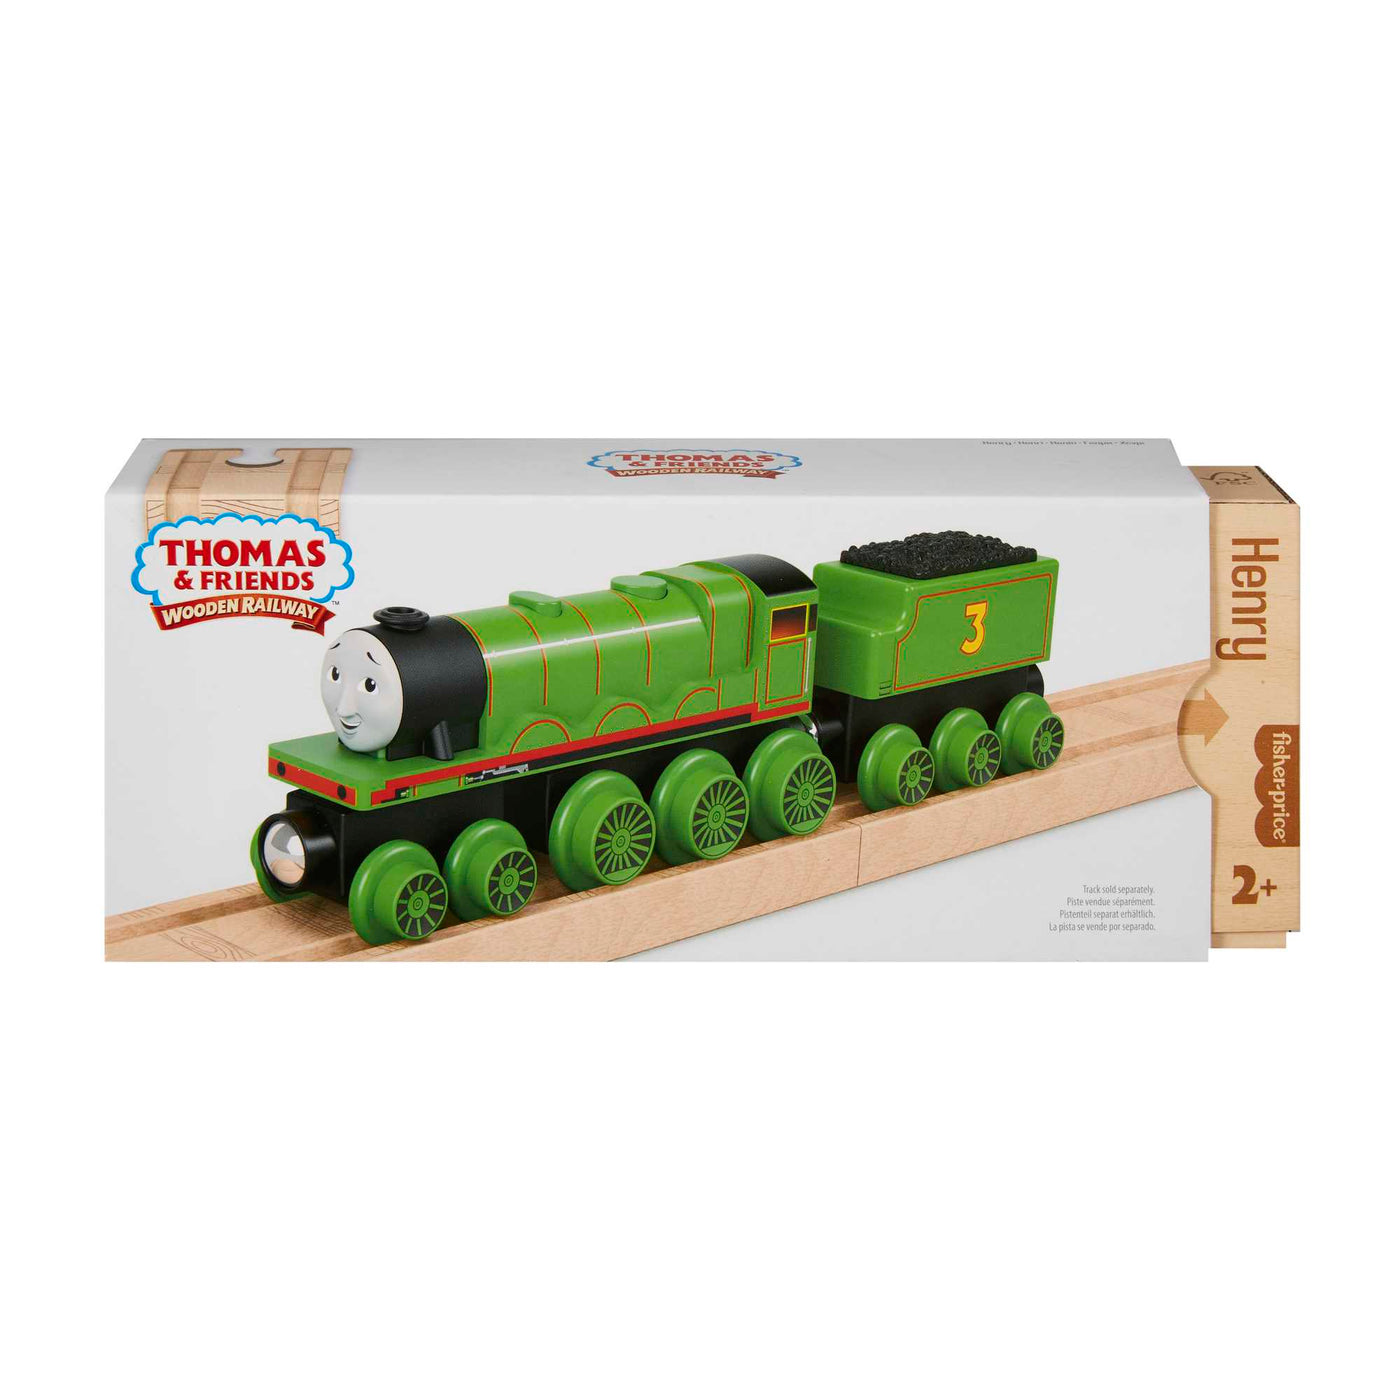 Thomas & Friends Wooden Railway Henry Engine and Coal-Car - Toybox Tales